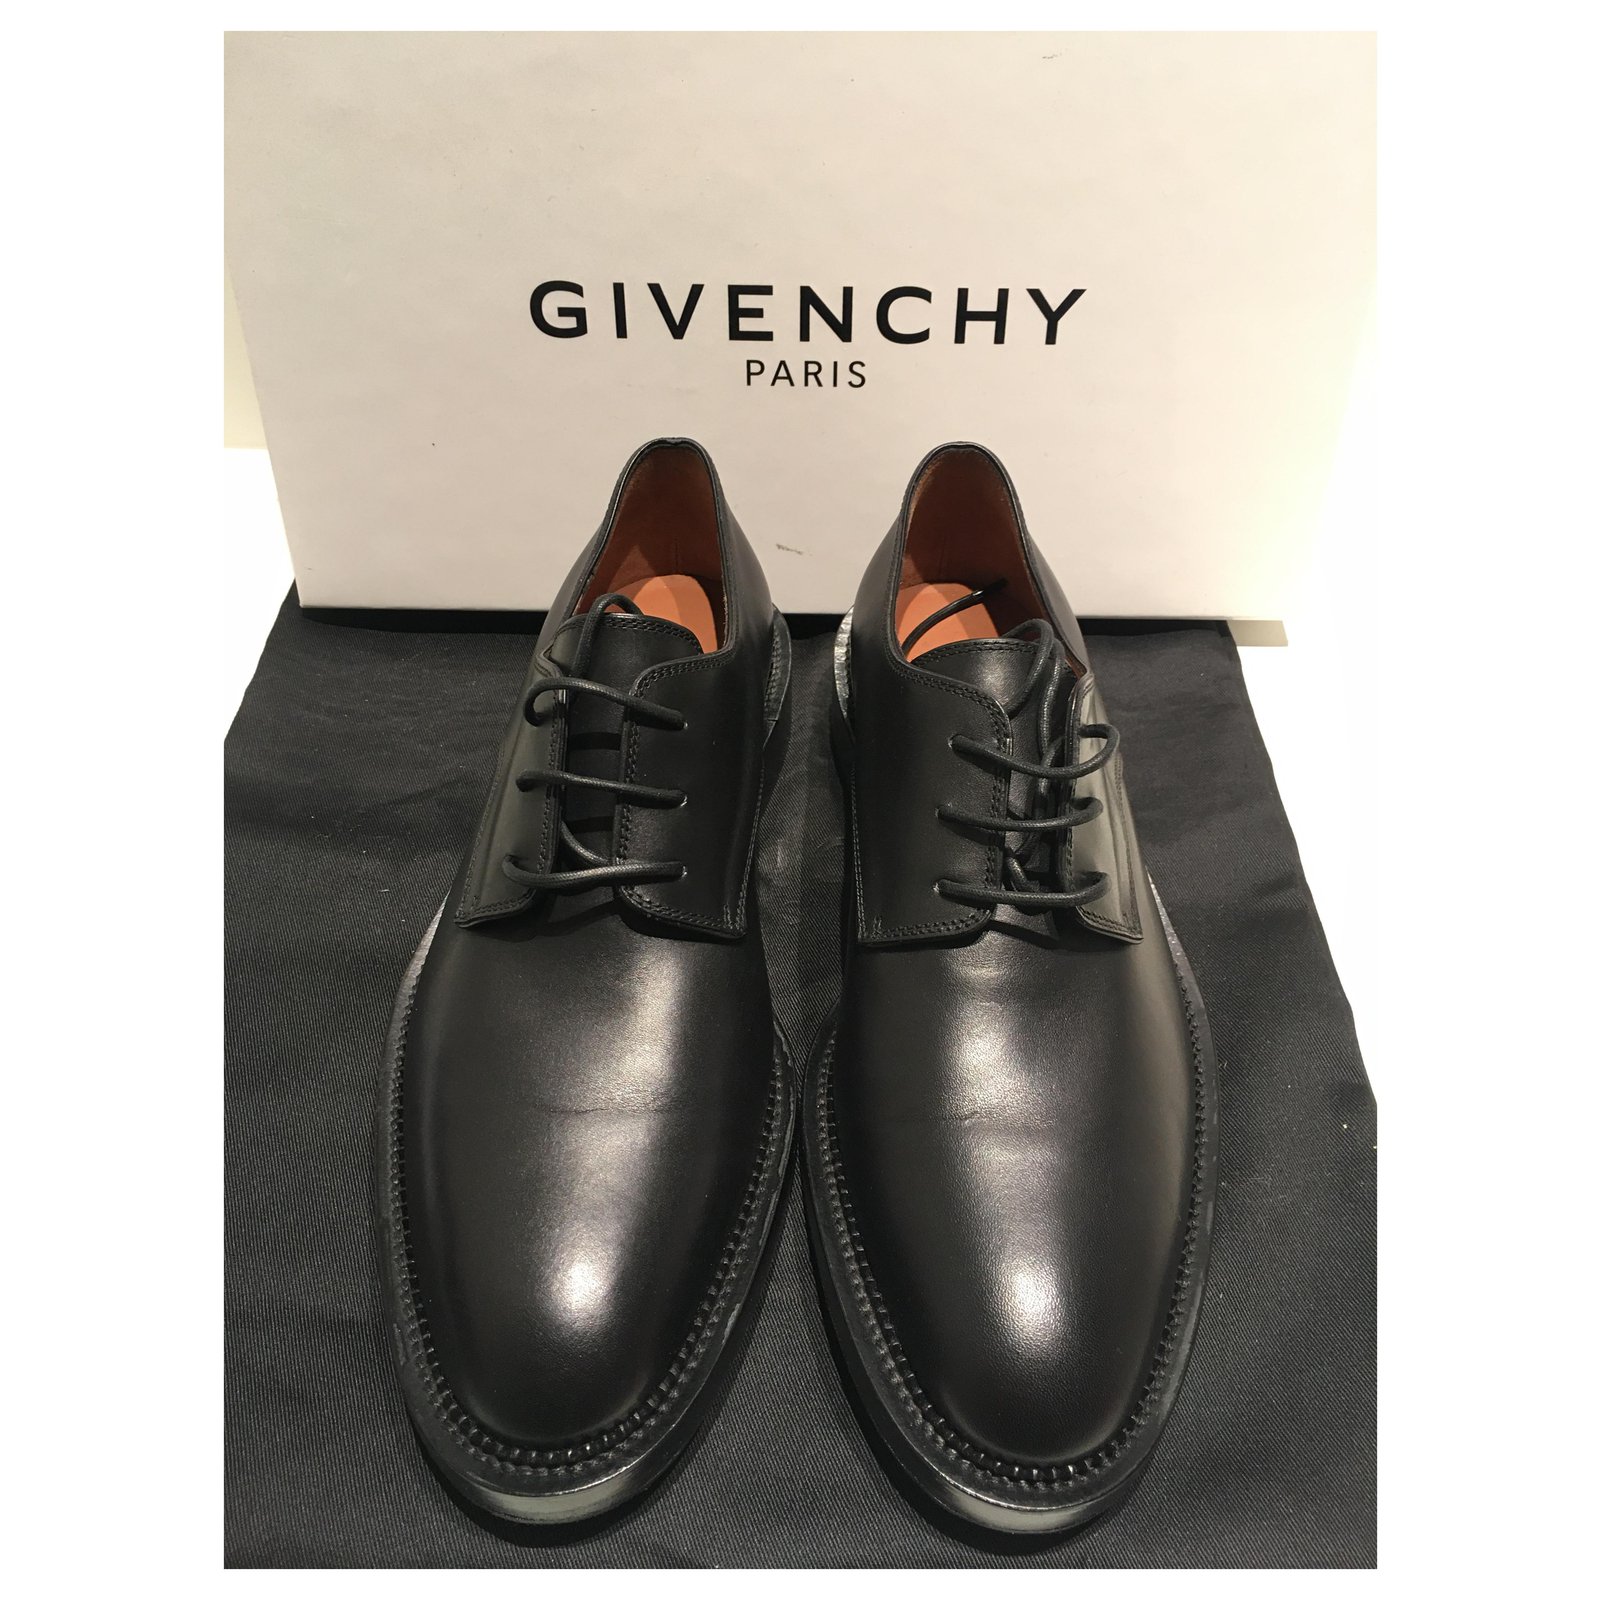 Givenchy black leather derby shoes